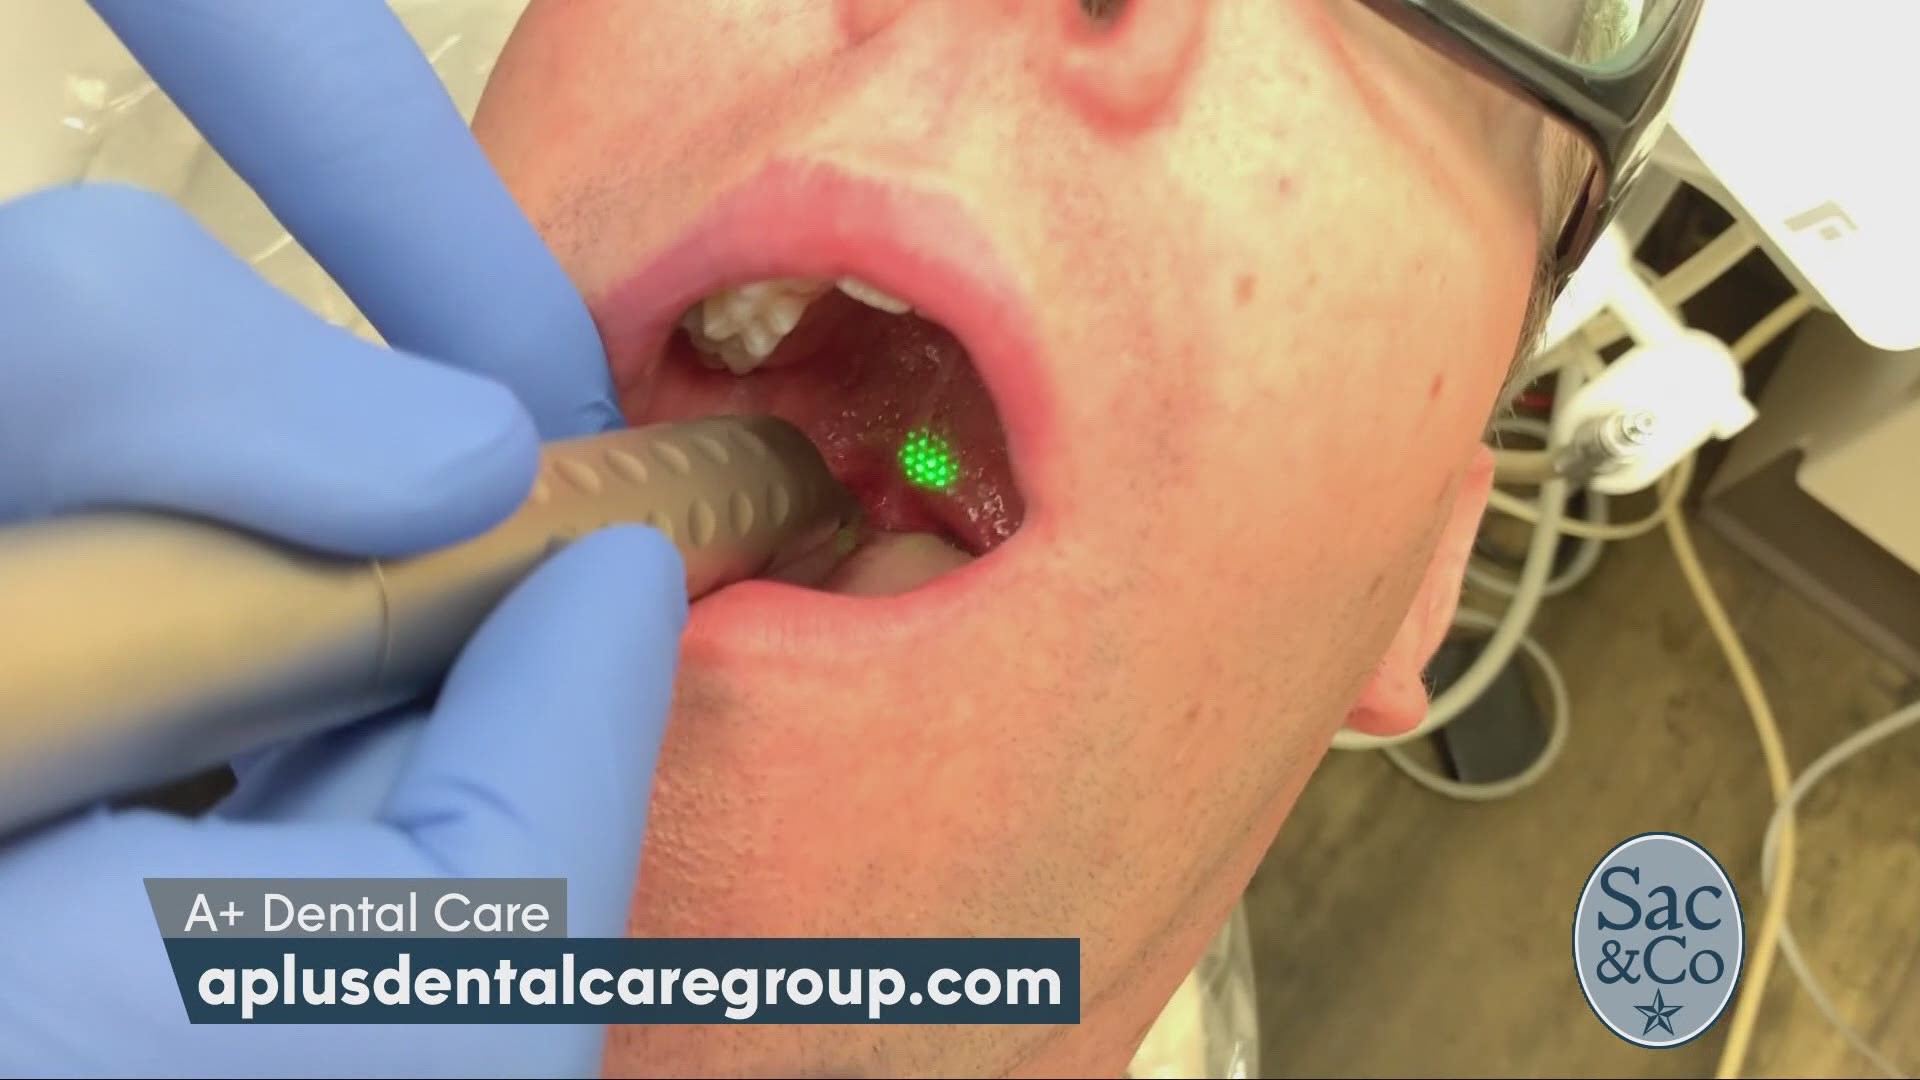 Learn how A+ Dental Care’s Night-Lase may be able to improve your quality of sleep! The following is a paid segment sponsored by A+ Dental Care.